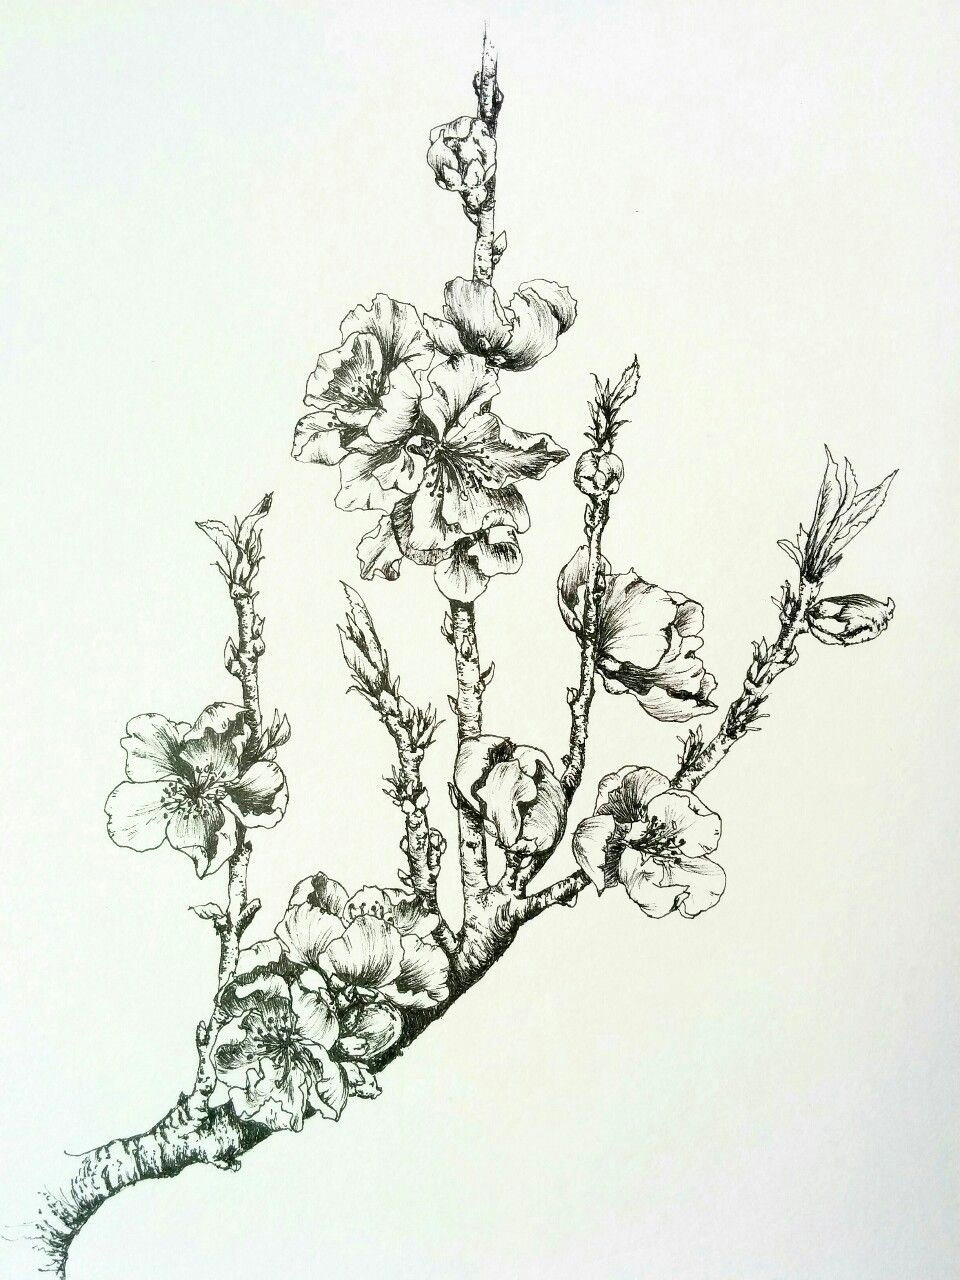 Drawings Of Two Flowers Nectarine Blossoms Lots Of Flower Buds at the Moment Hoping for A